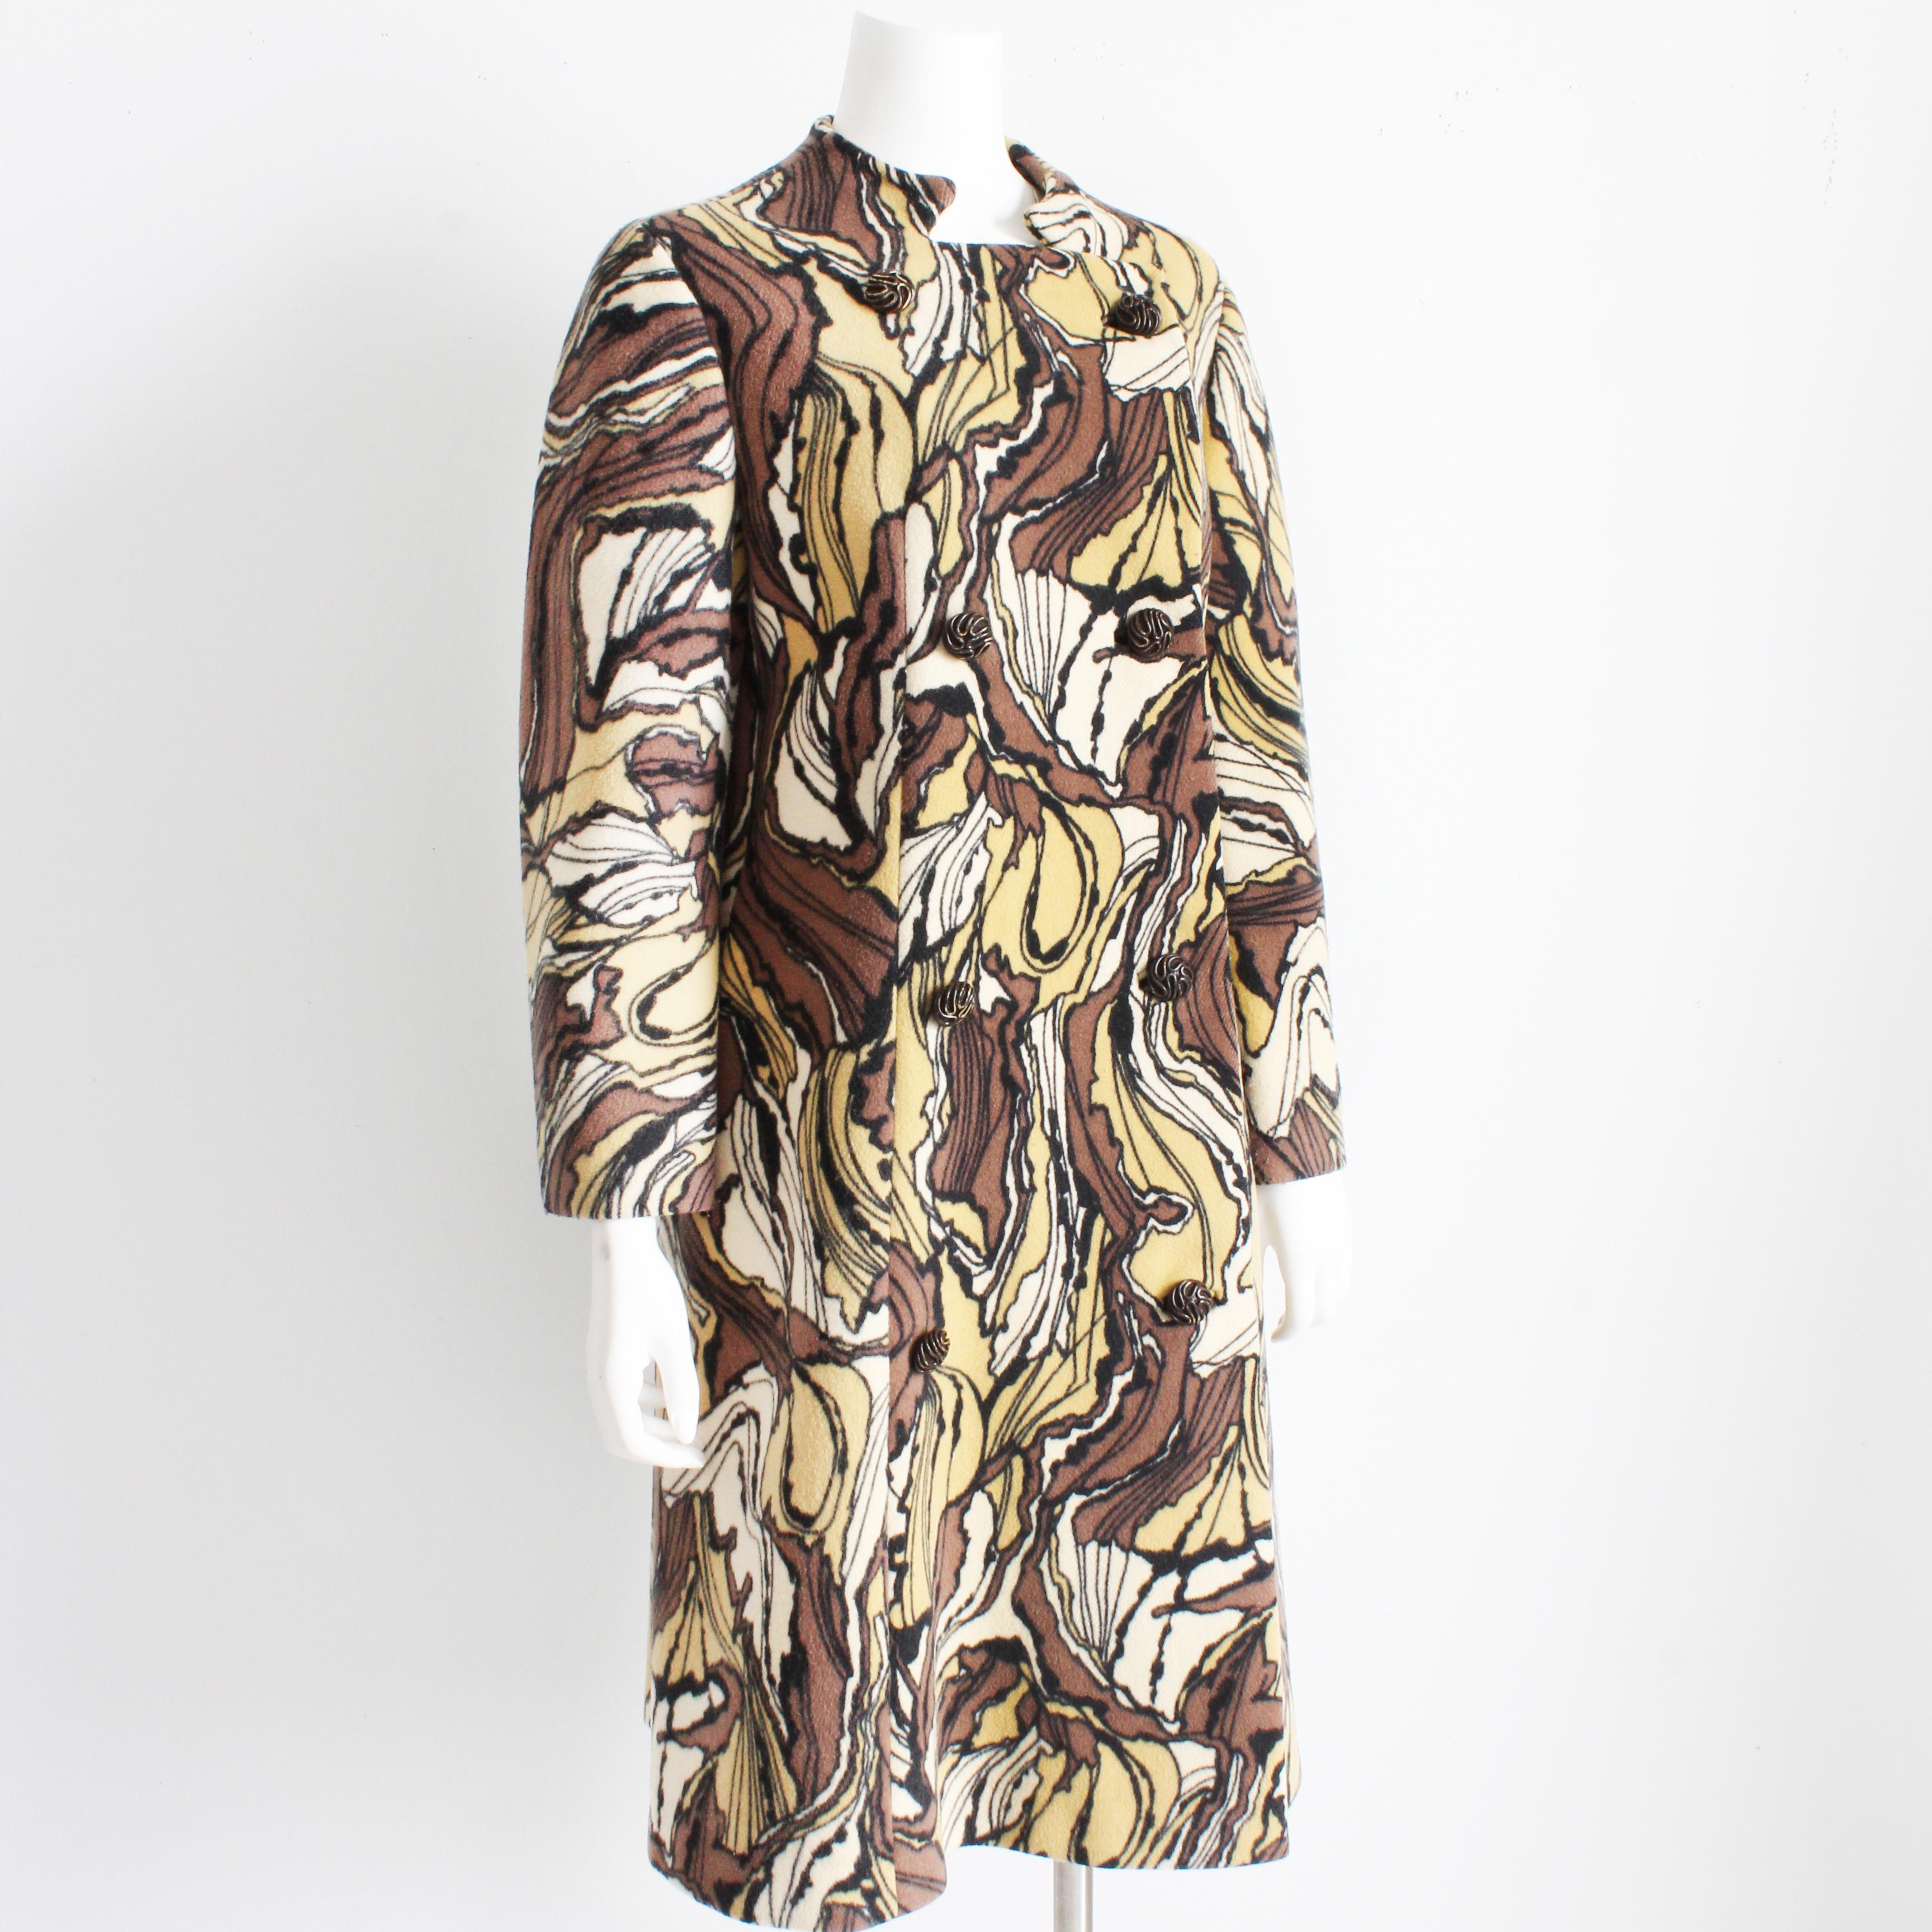 Here's a hard-to-find and incredibly stunning coat from Ronald Amey, made for his Burke-Amey label and sold by Saks Fifth Avenue, most likely in the 1960s. Made from a fabulous abstract print wool from textile genius Tzaims Luksus, this piece also